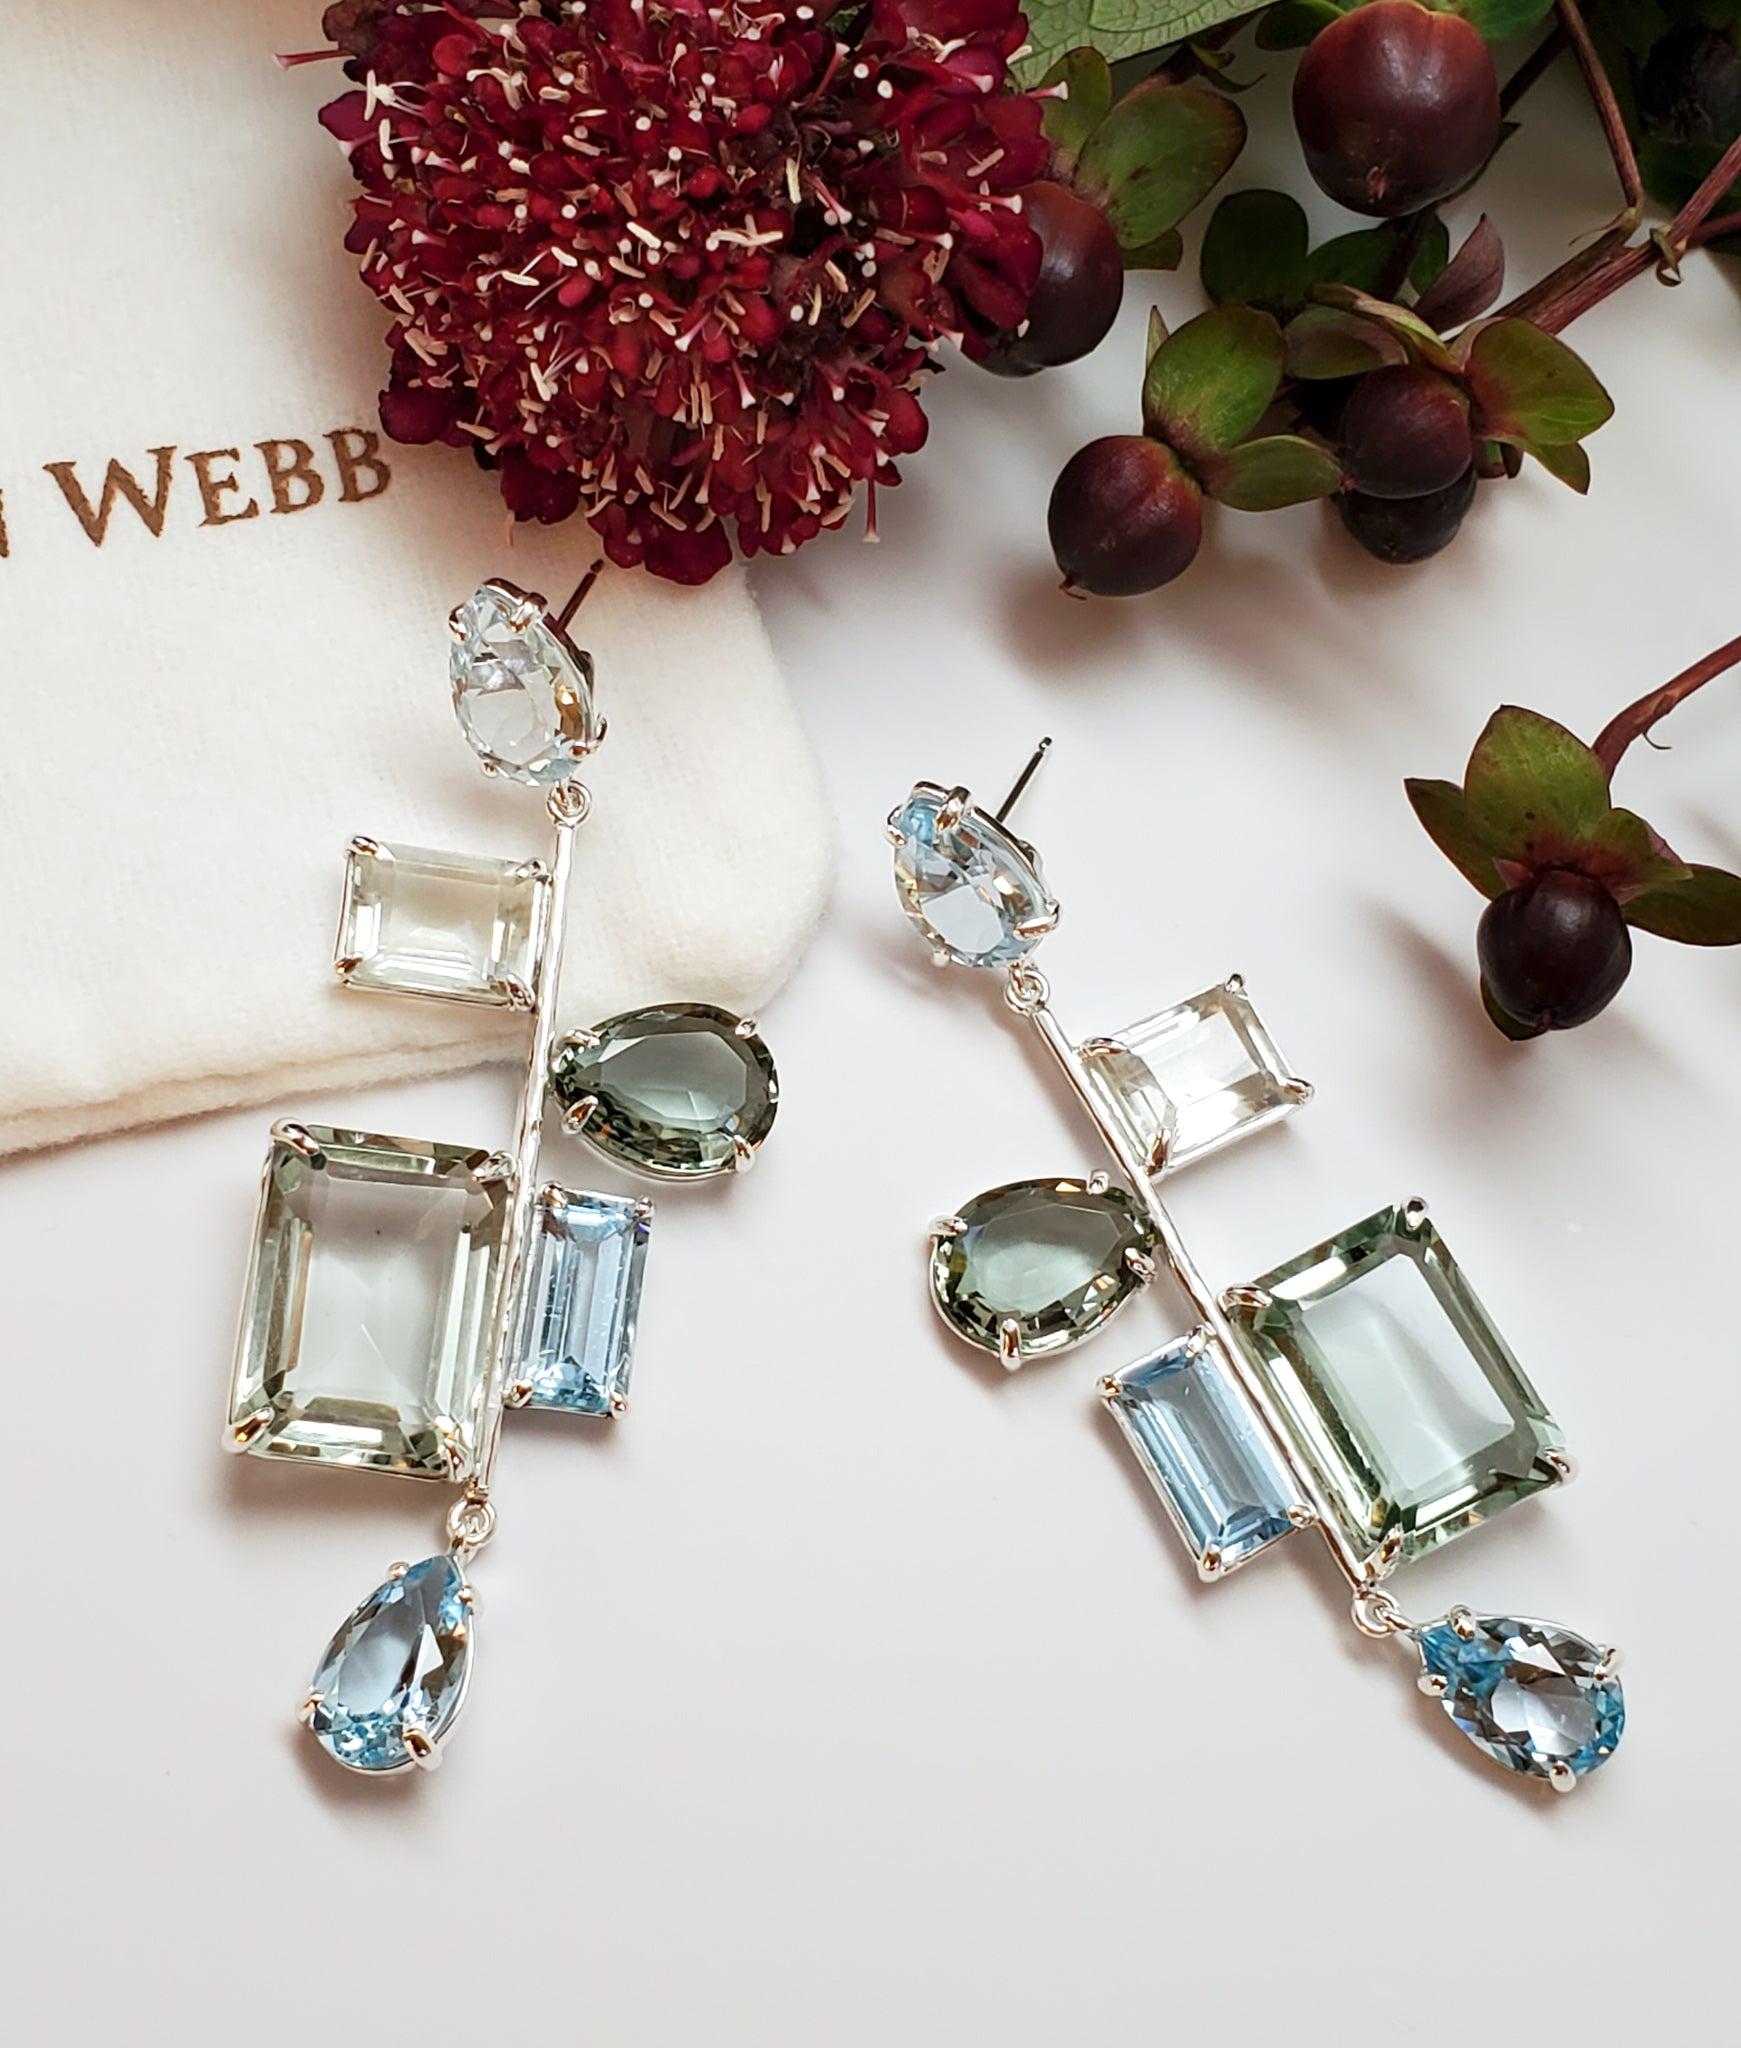 Intention: Let It Flow

Design: Tranquil and refined, yet unexpected and offbeat, these waterfall drop earrings are set in sterling silver with blue topaz, prasiolite, blue quartz and green quartz. Let them guide you downstream, slow down your pace